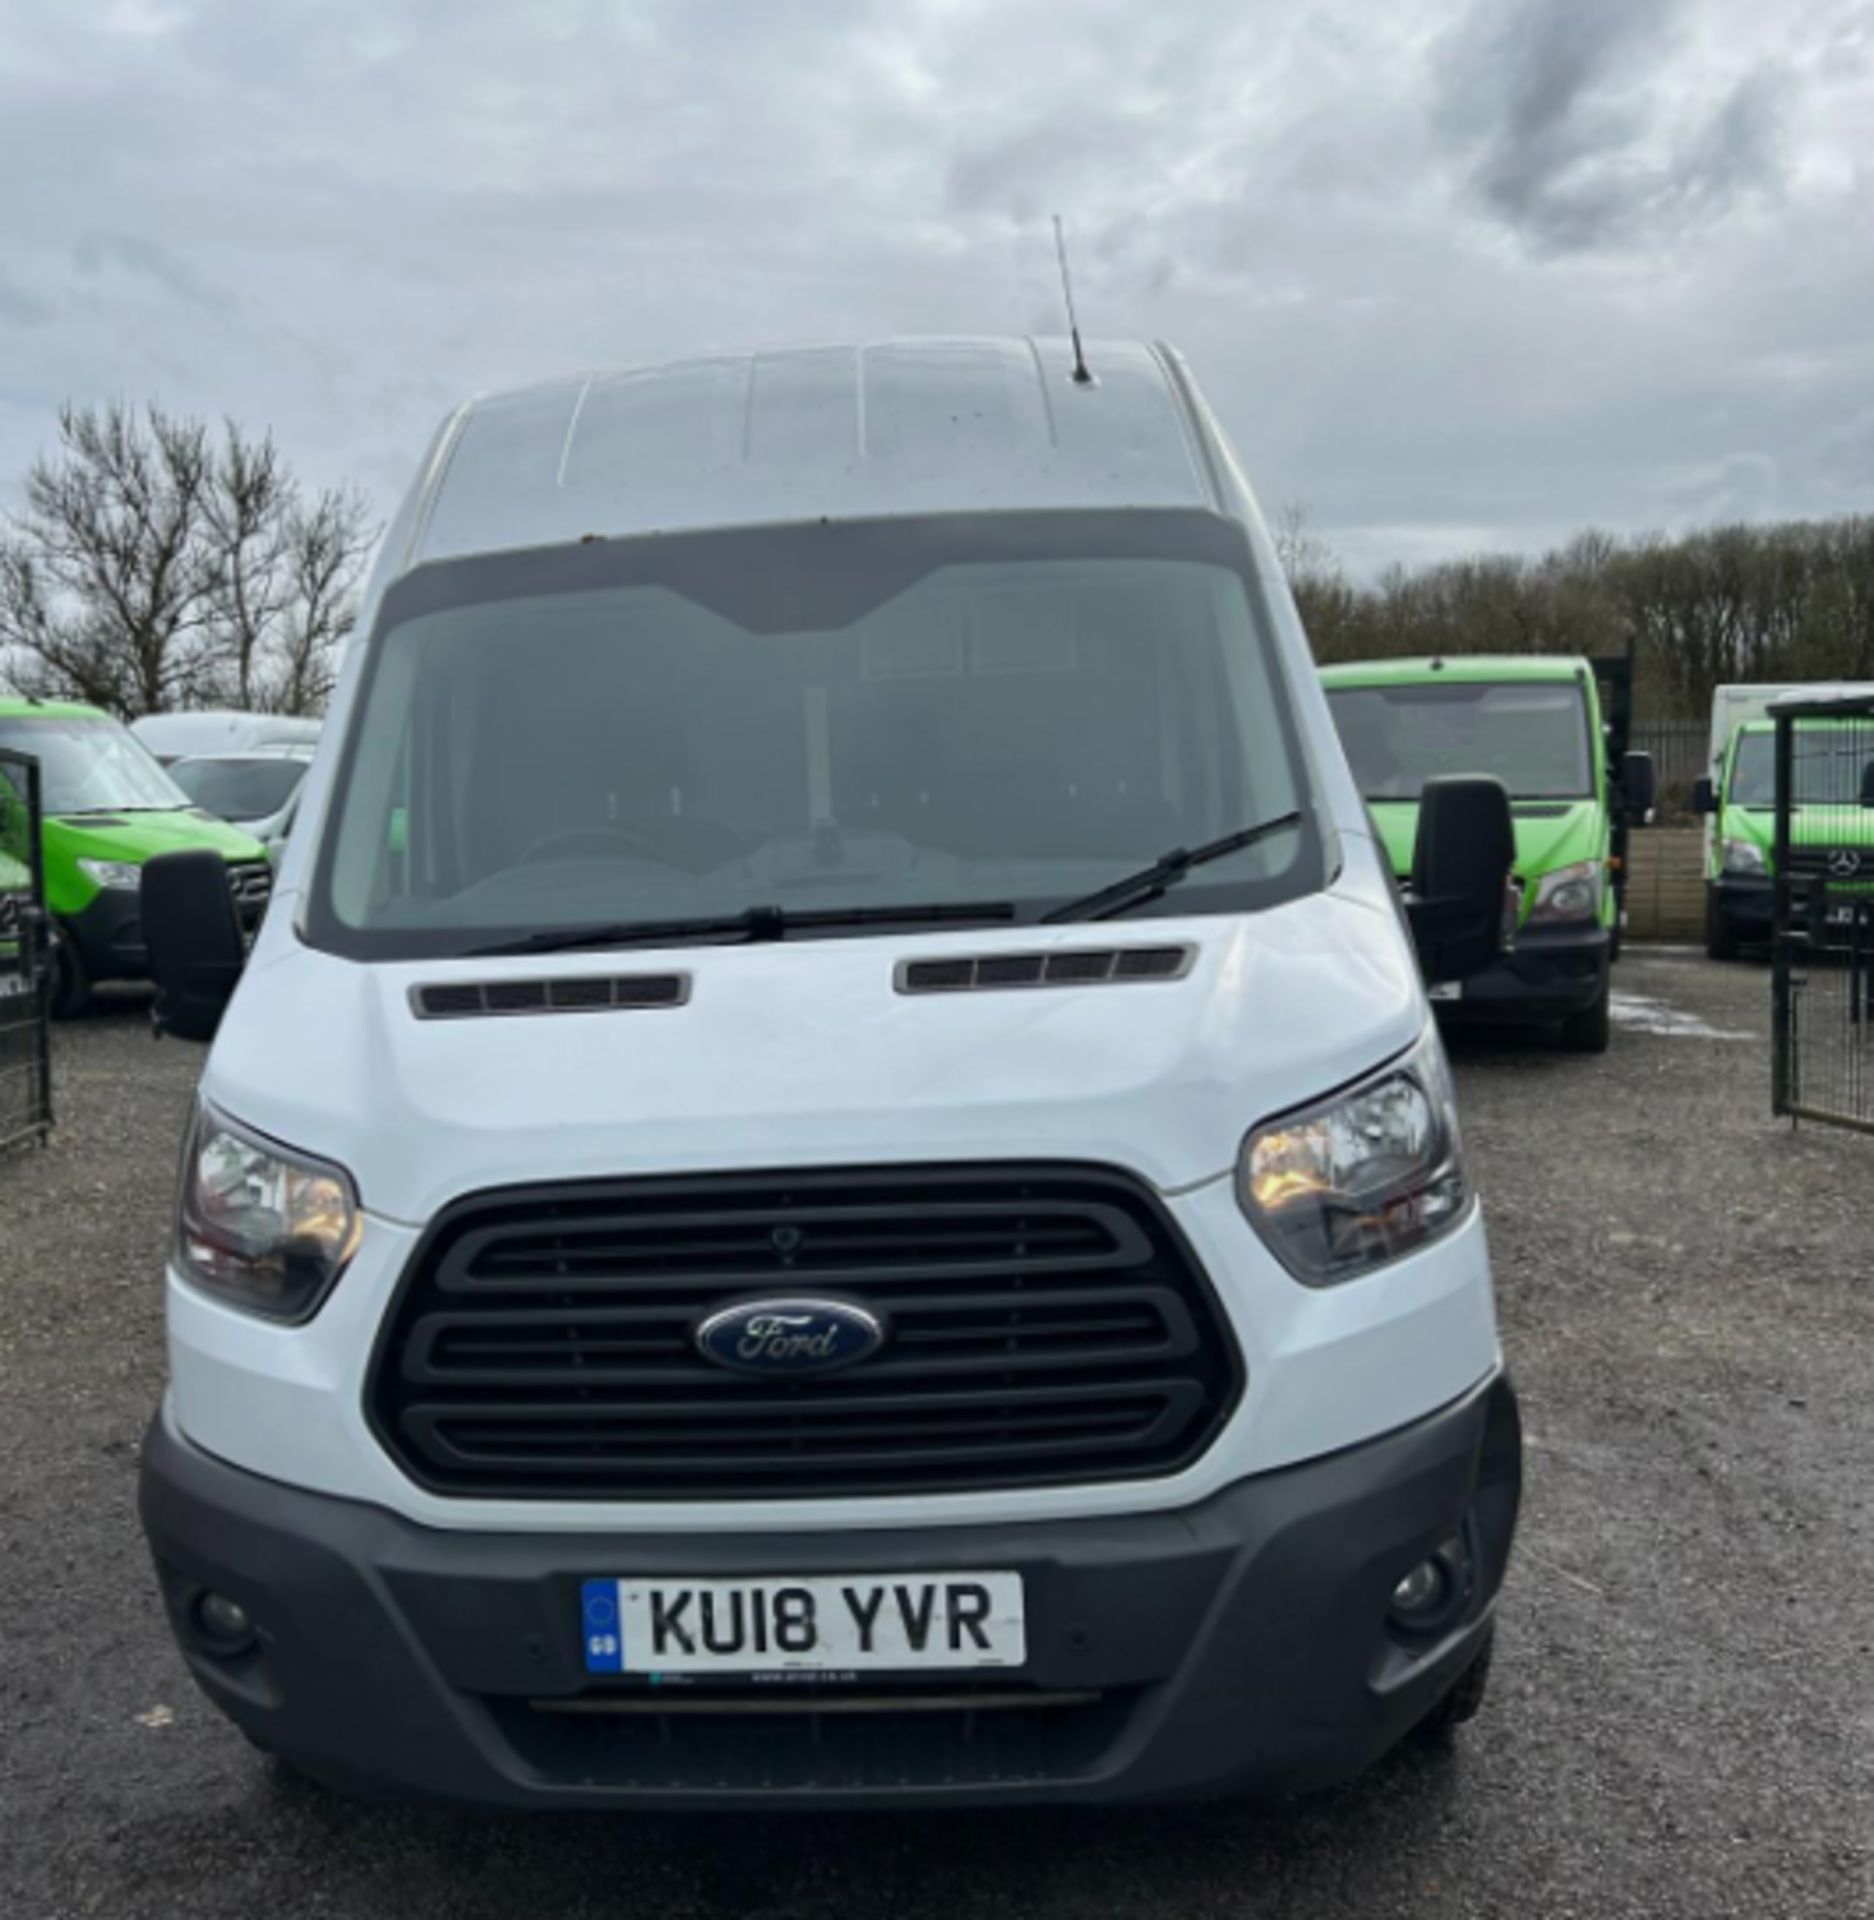 >>>SPECIAL CLEARANCE<<< 2018 FORD TRANSIT 2.0 TDCI L3 H3: RELIABLE WORKHORSE READY FOR YOUR FLEET! - Image 2 of 13